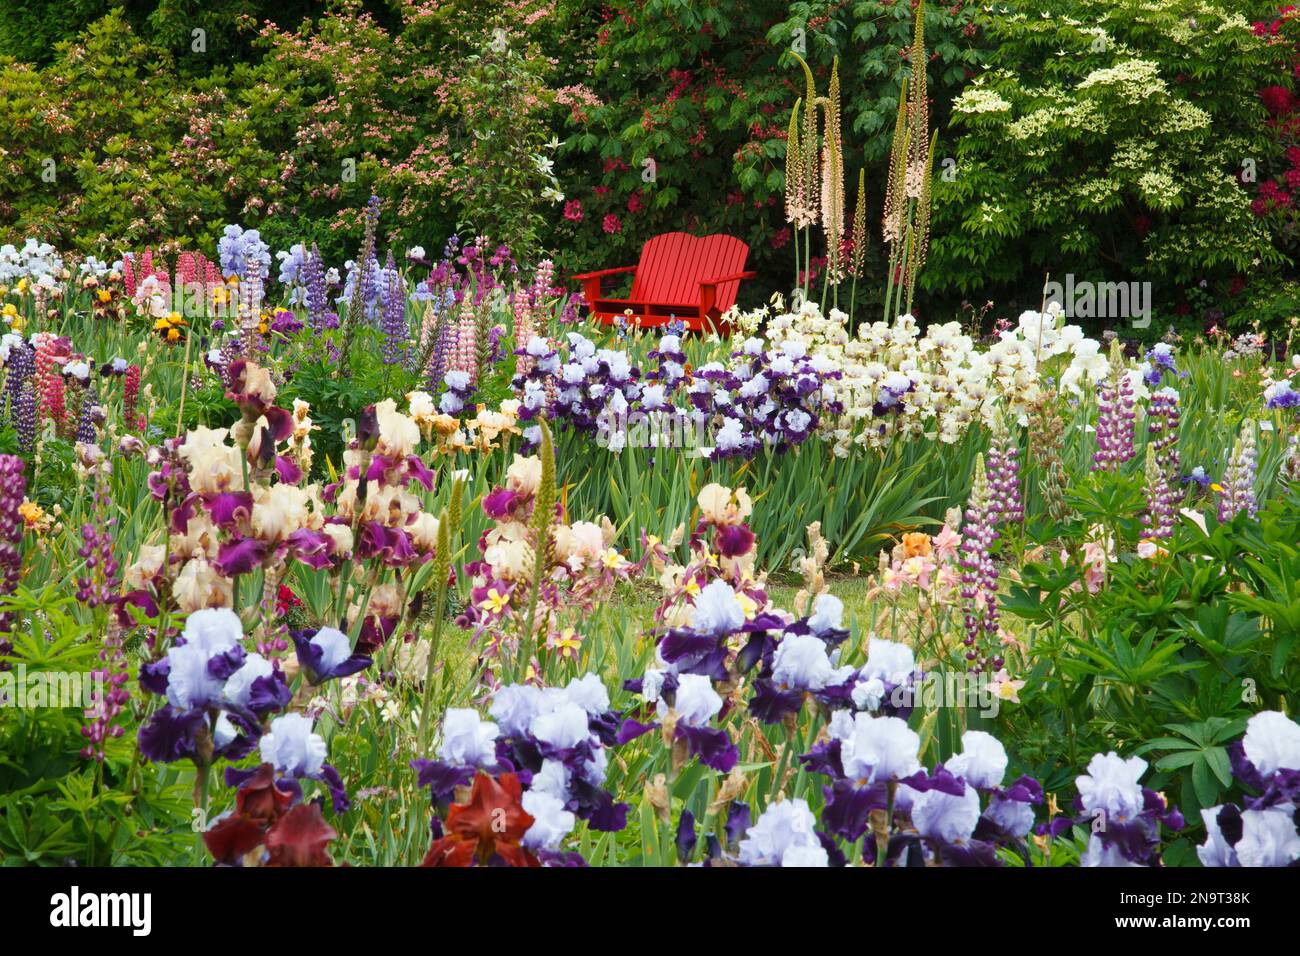 Vibrant coloured bench and blossoming irises in a garden at Schreiner's Iris Gardens in the Willamette Valley, Oregon, USA Stock Photo